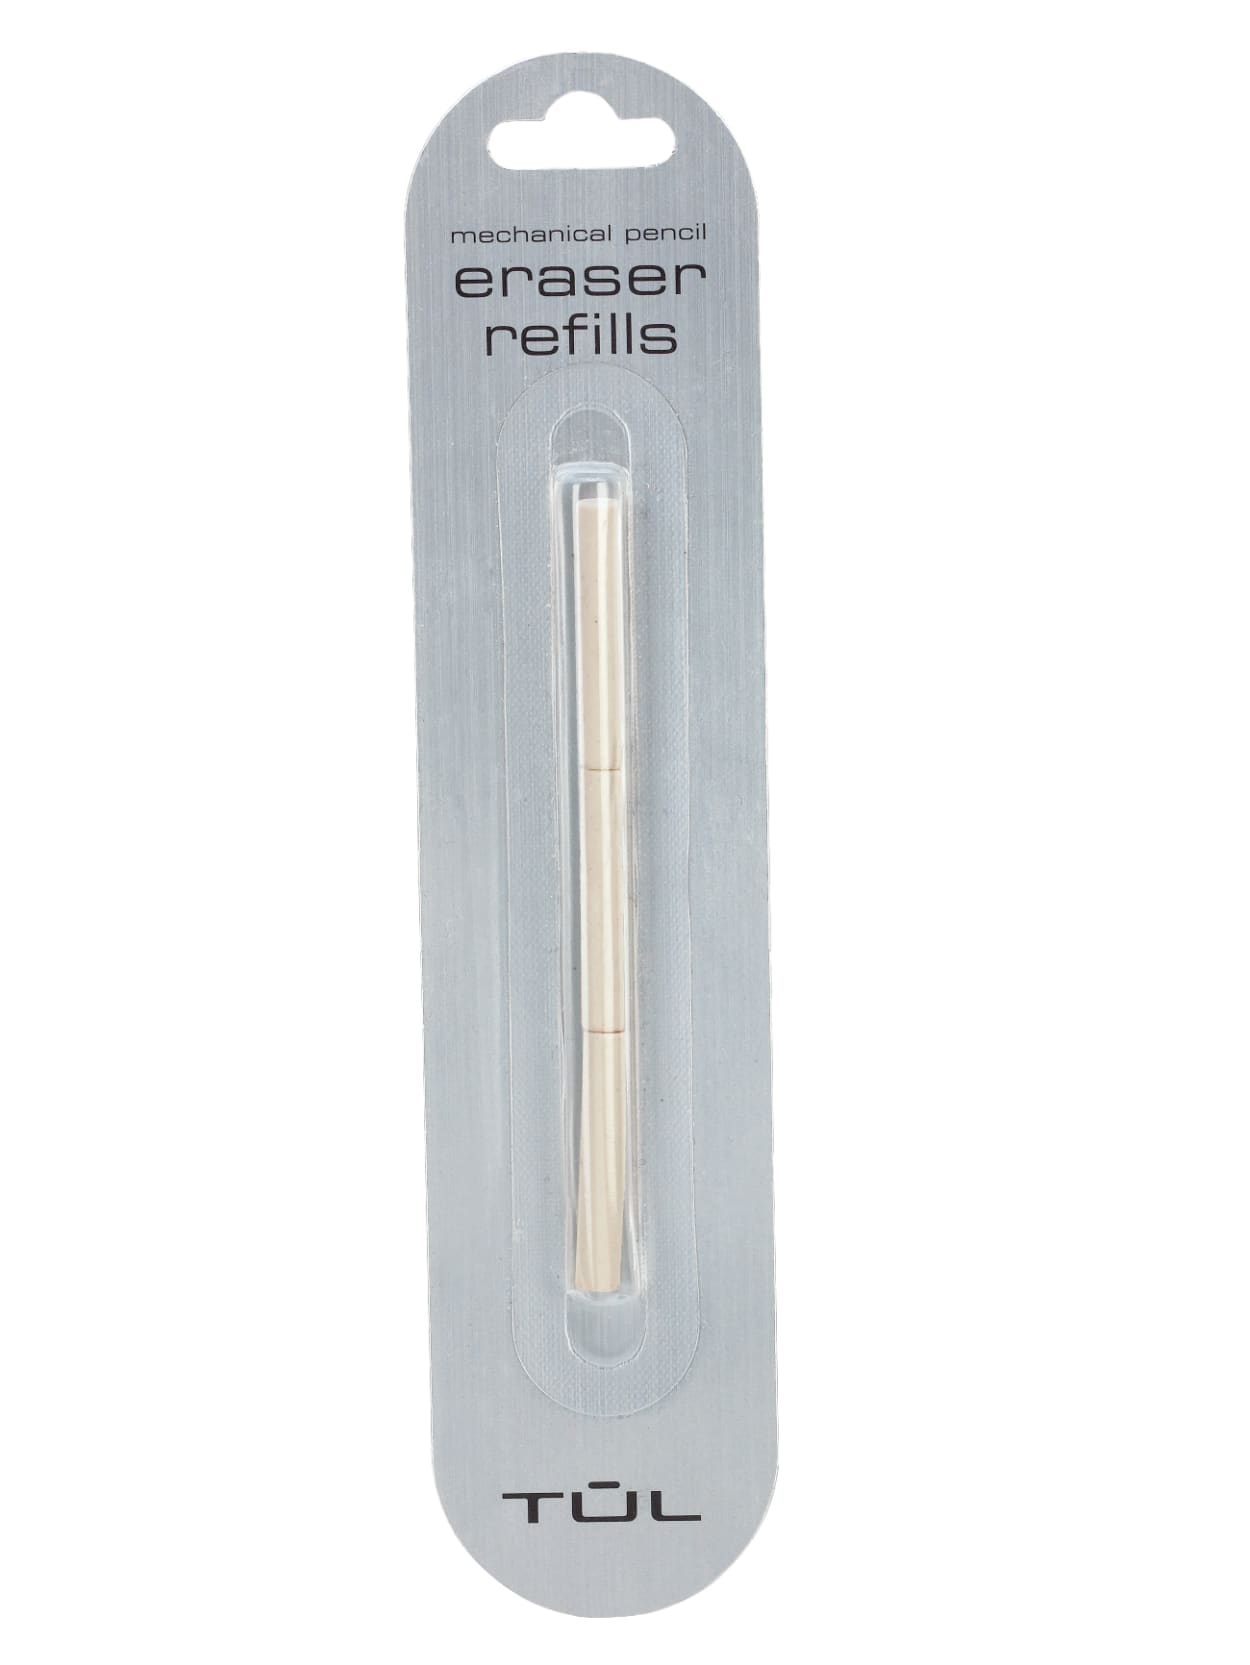 mechanical pencil with long eraser